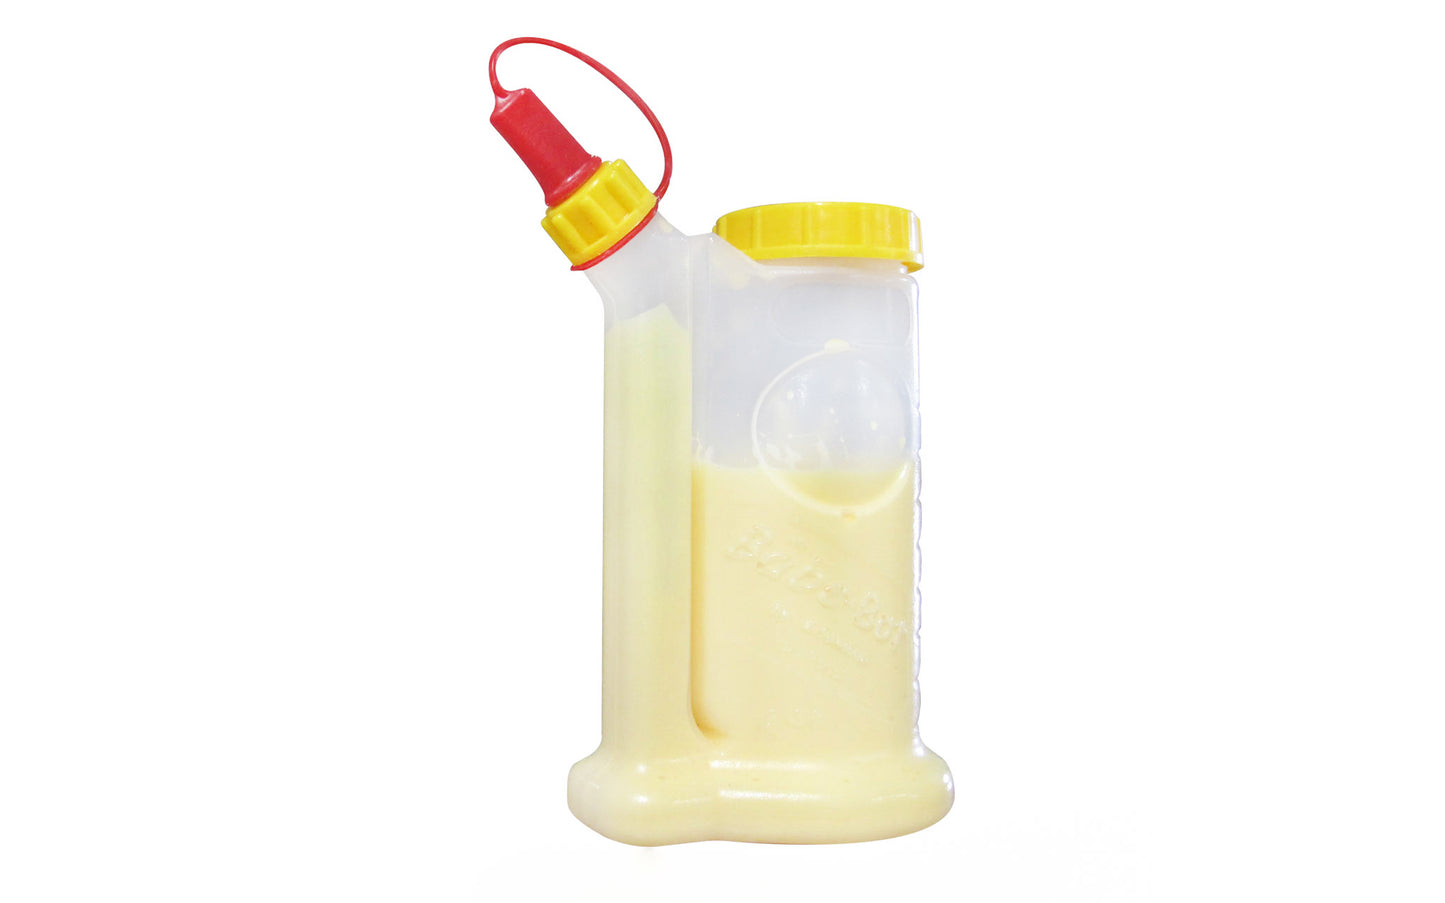 The FastCap BabeBot ~ 4 oz is a professional glue bottle that works with most glues & solvents. Easy squeeze bottle design that sucks glue back inside ~ 663807982117